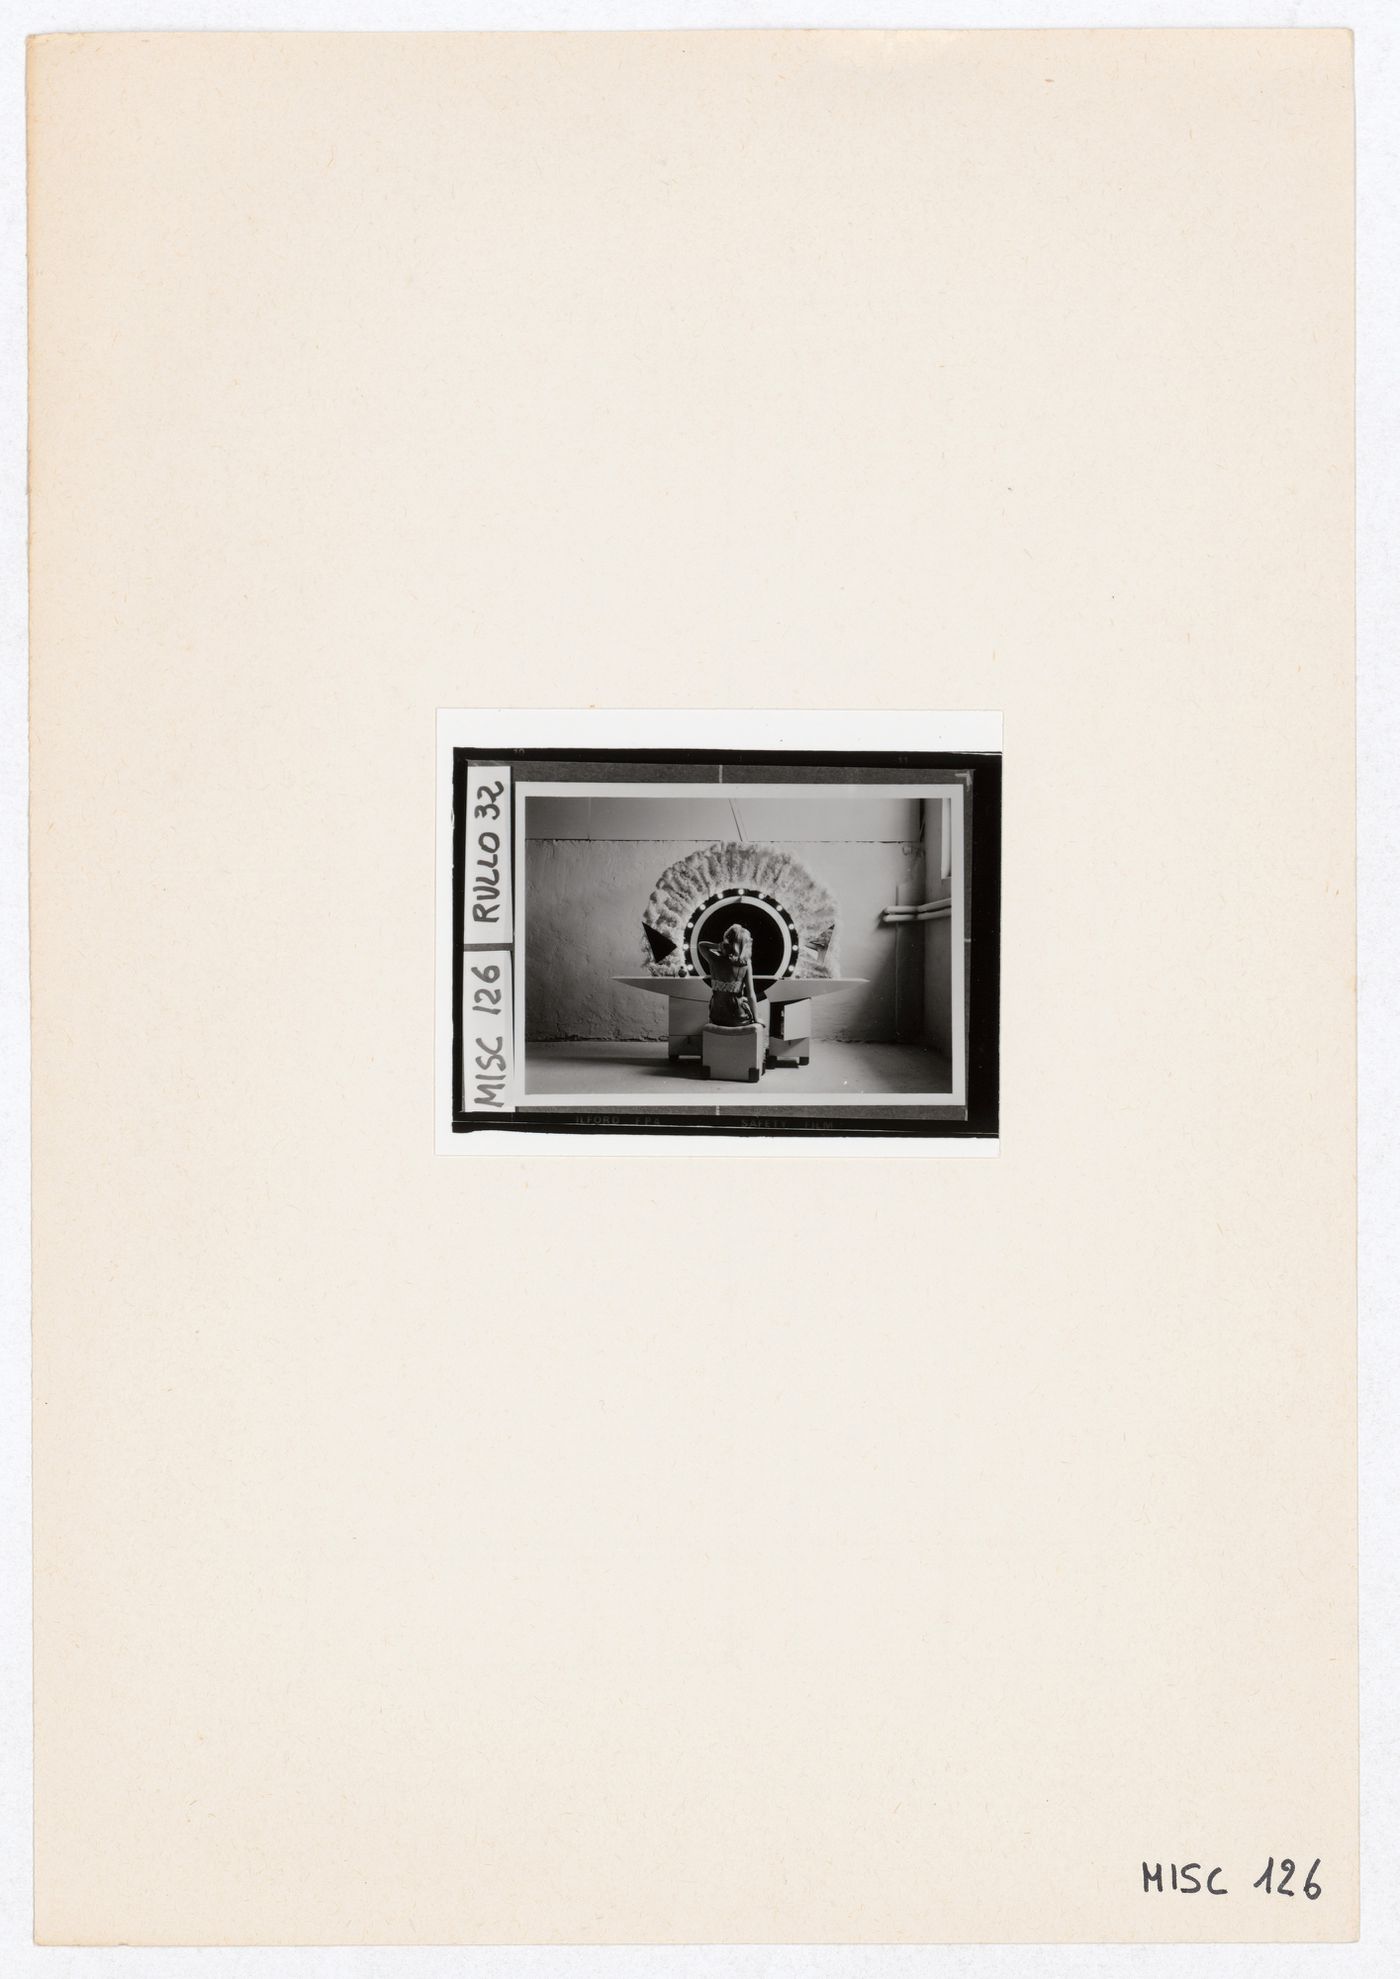 Photograph for the exhibition Hans Hollein. Opere 1960-1988